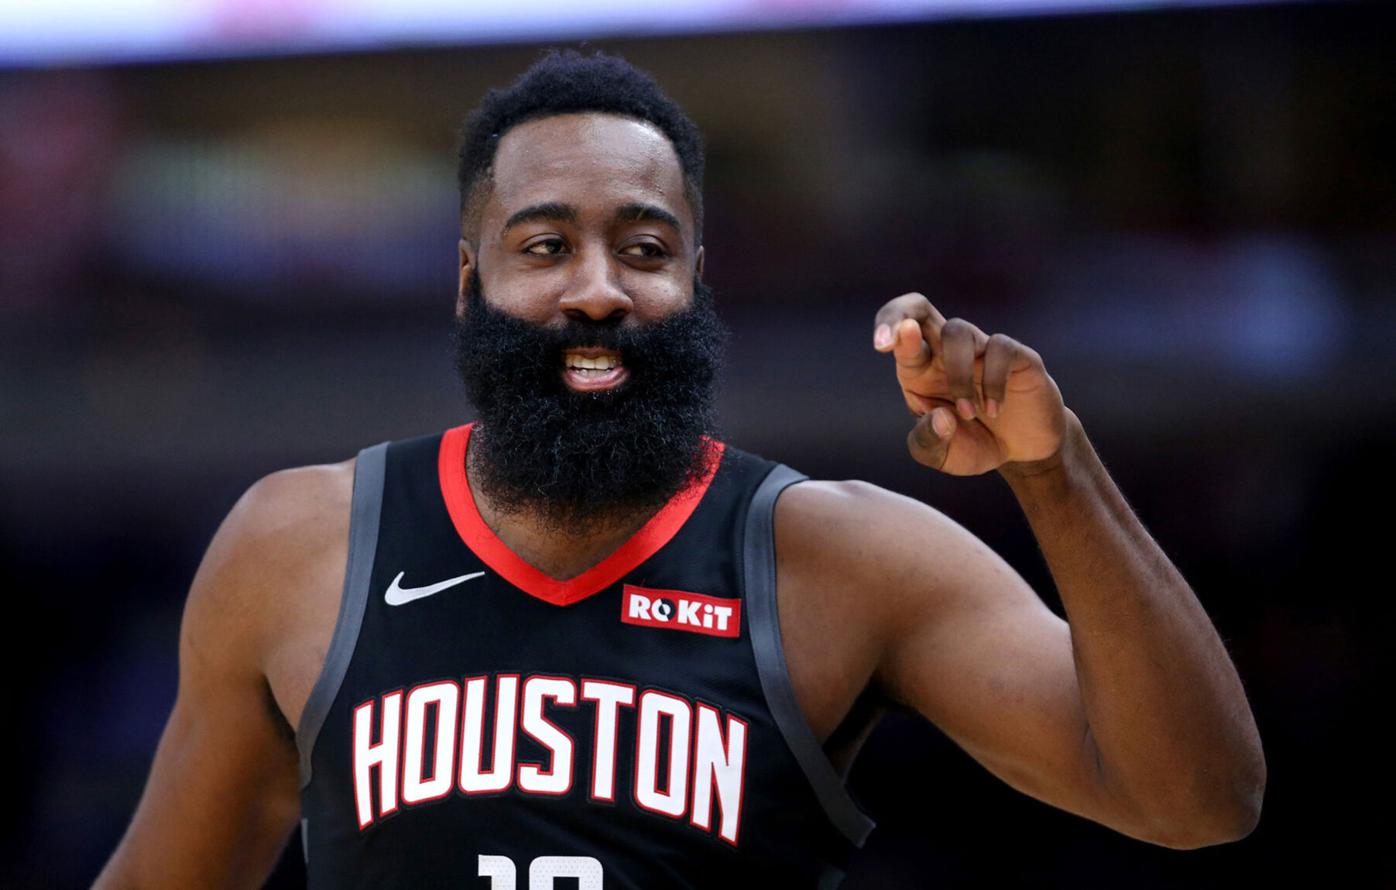 James Harden of the Houston Rockets wearing a traditional Chinese